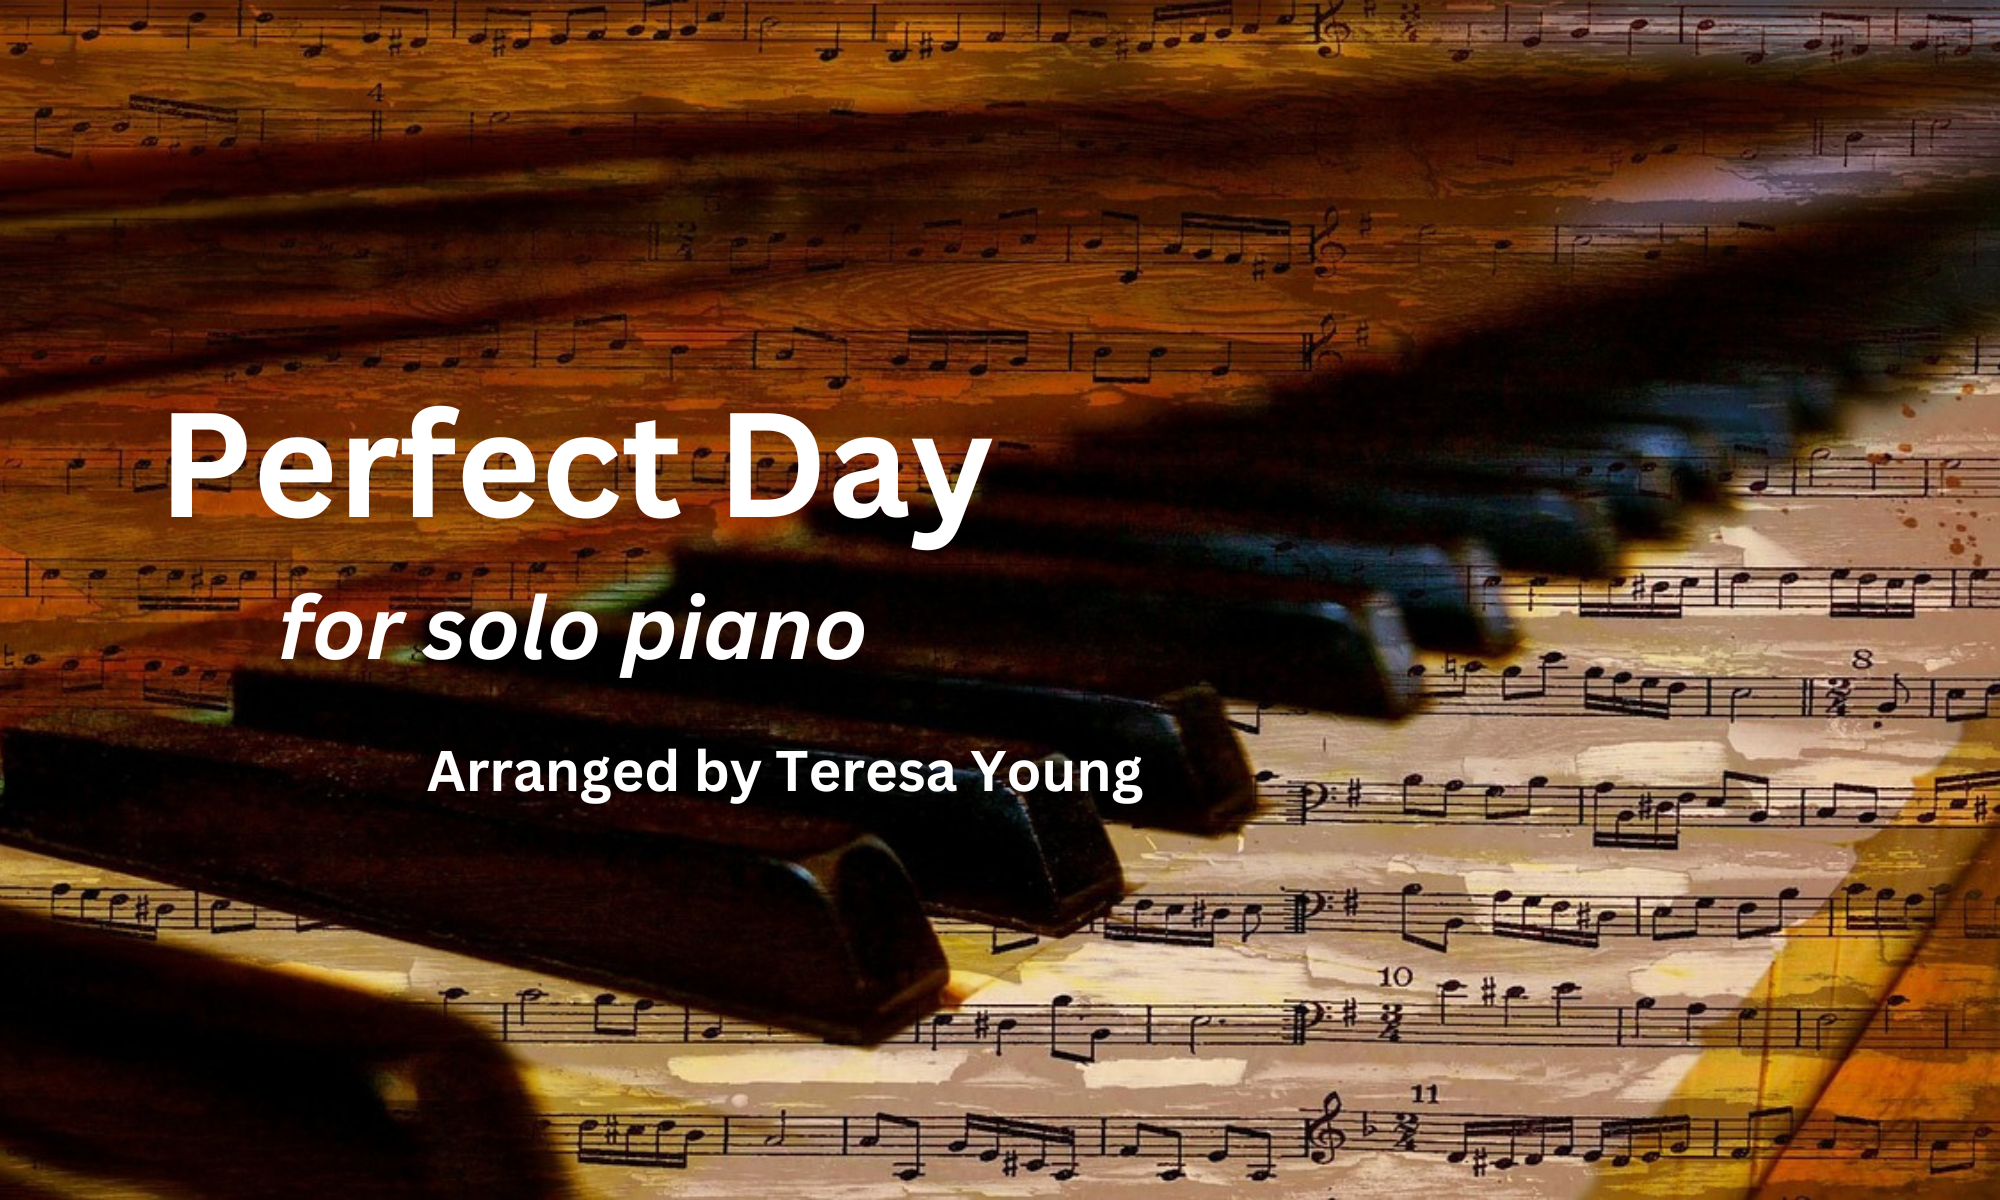 Perfect Day, for solo piano, arranged by Teresa Young